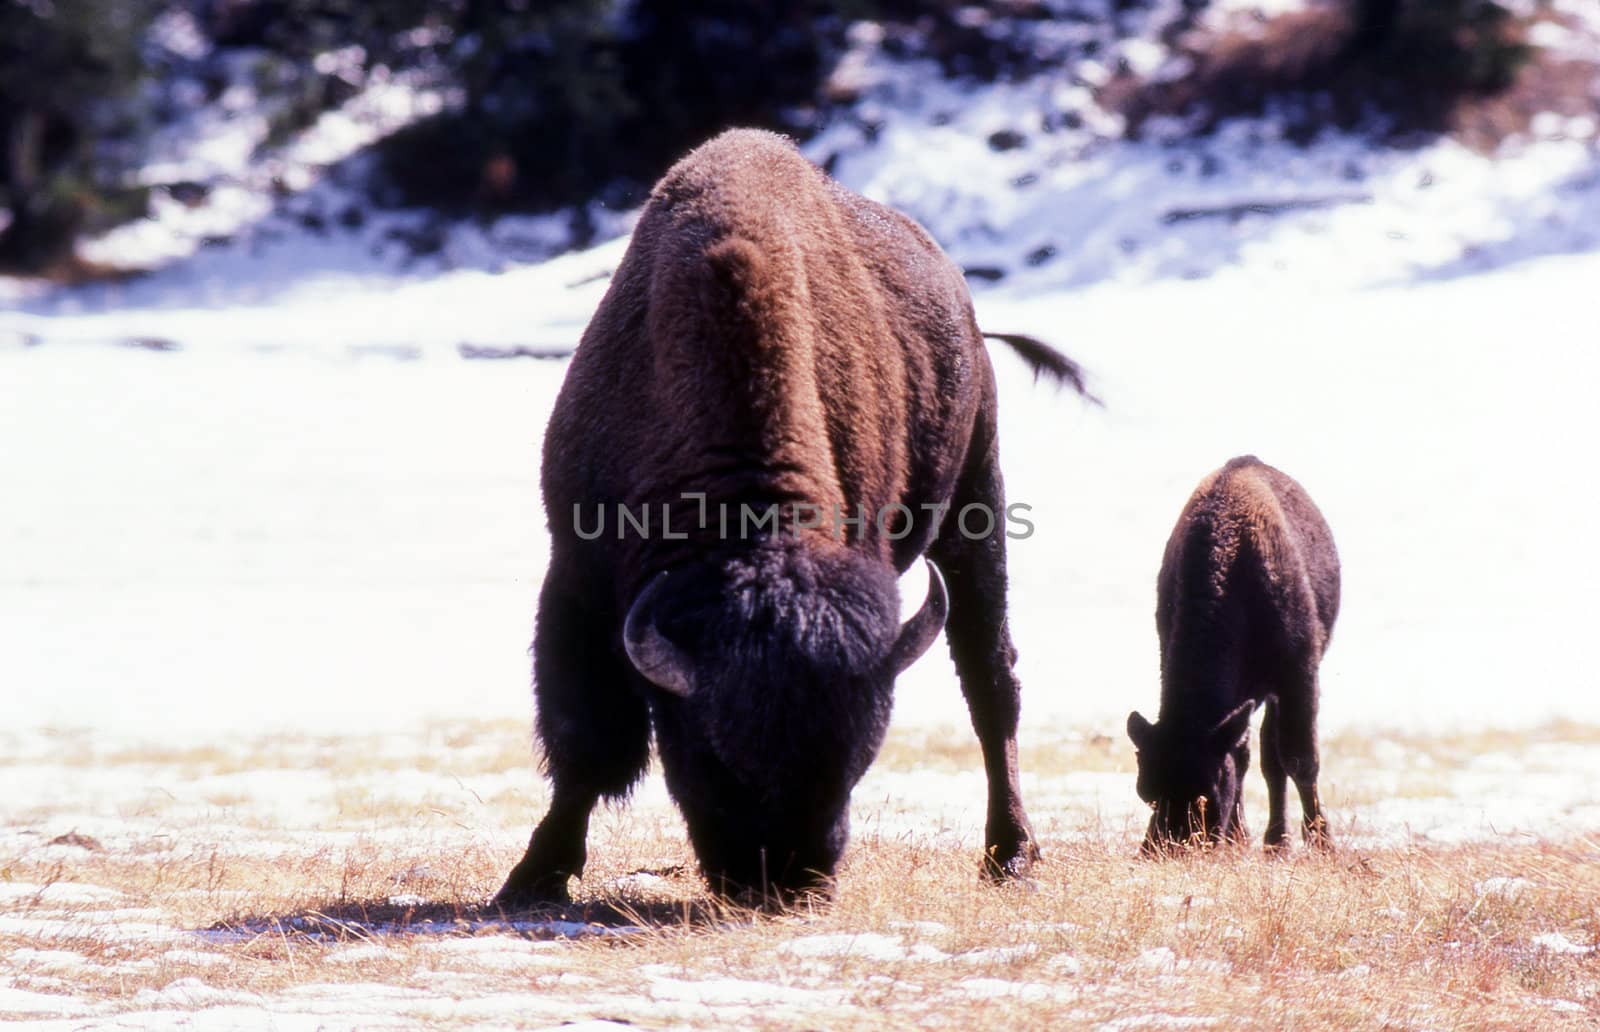 Bison with calf grazing